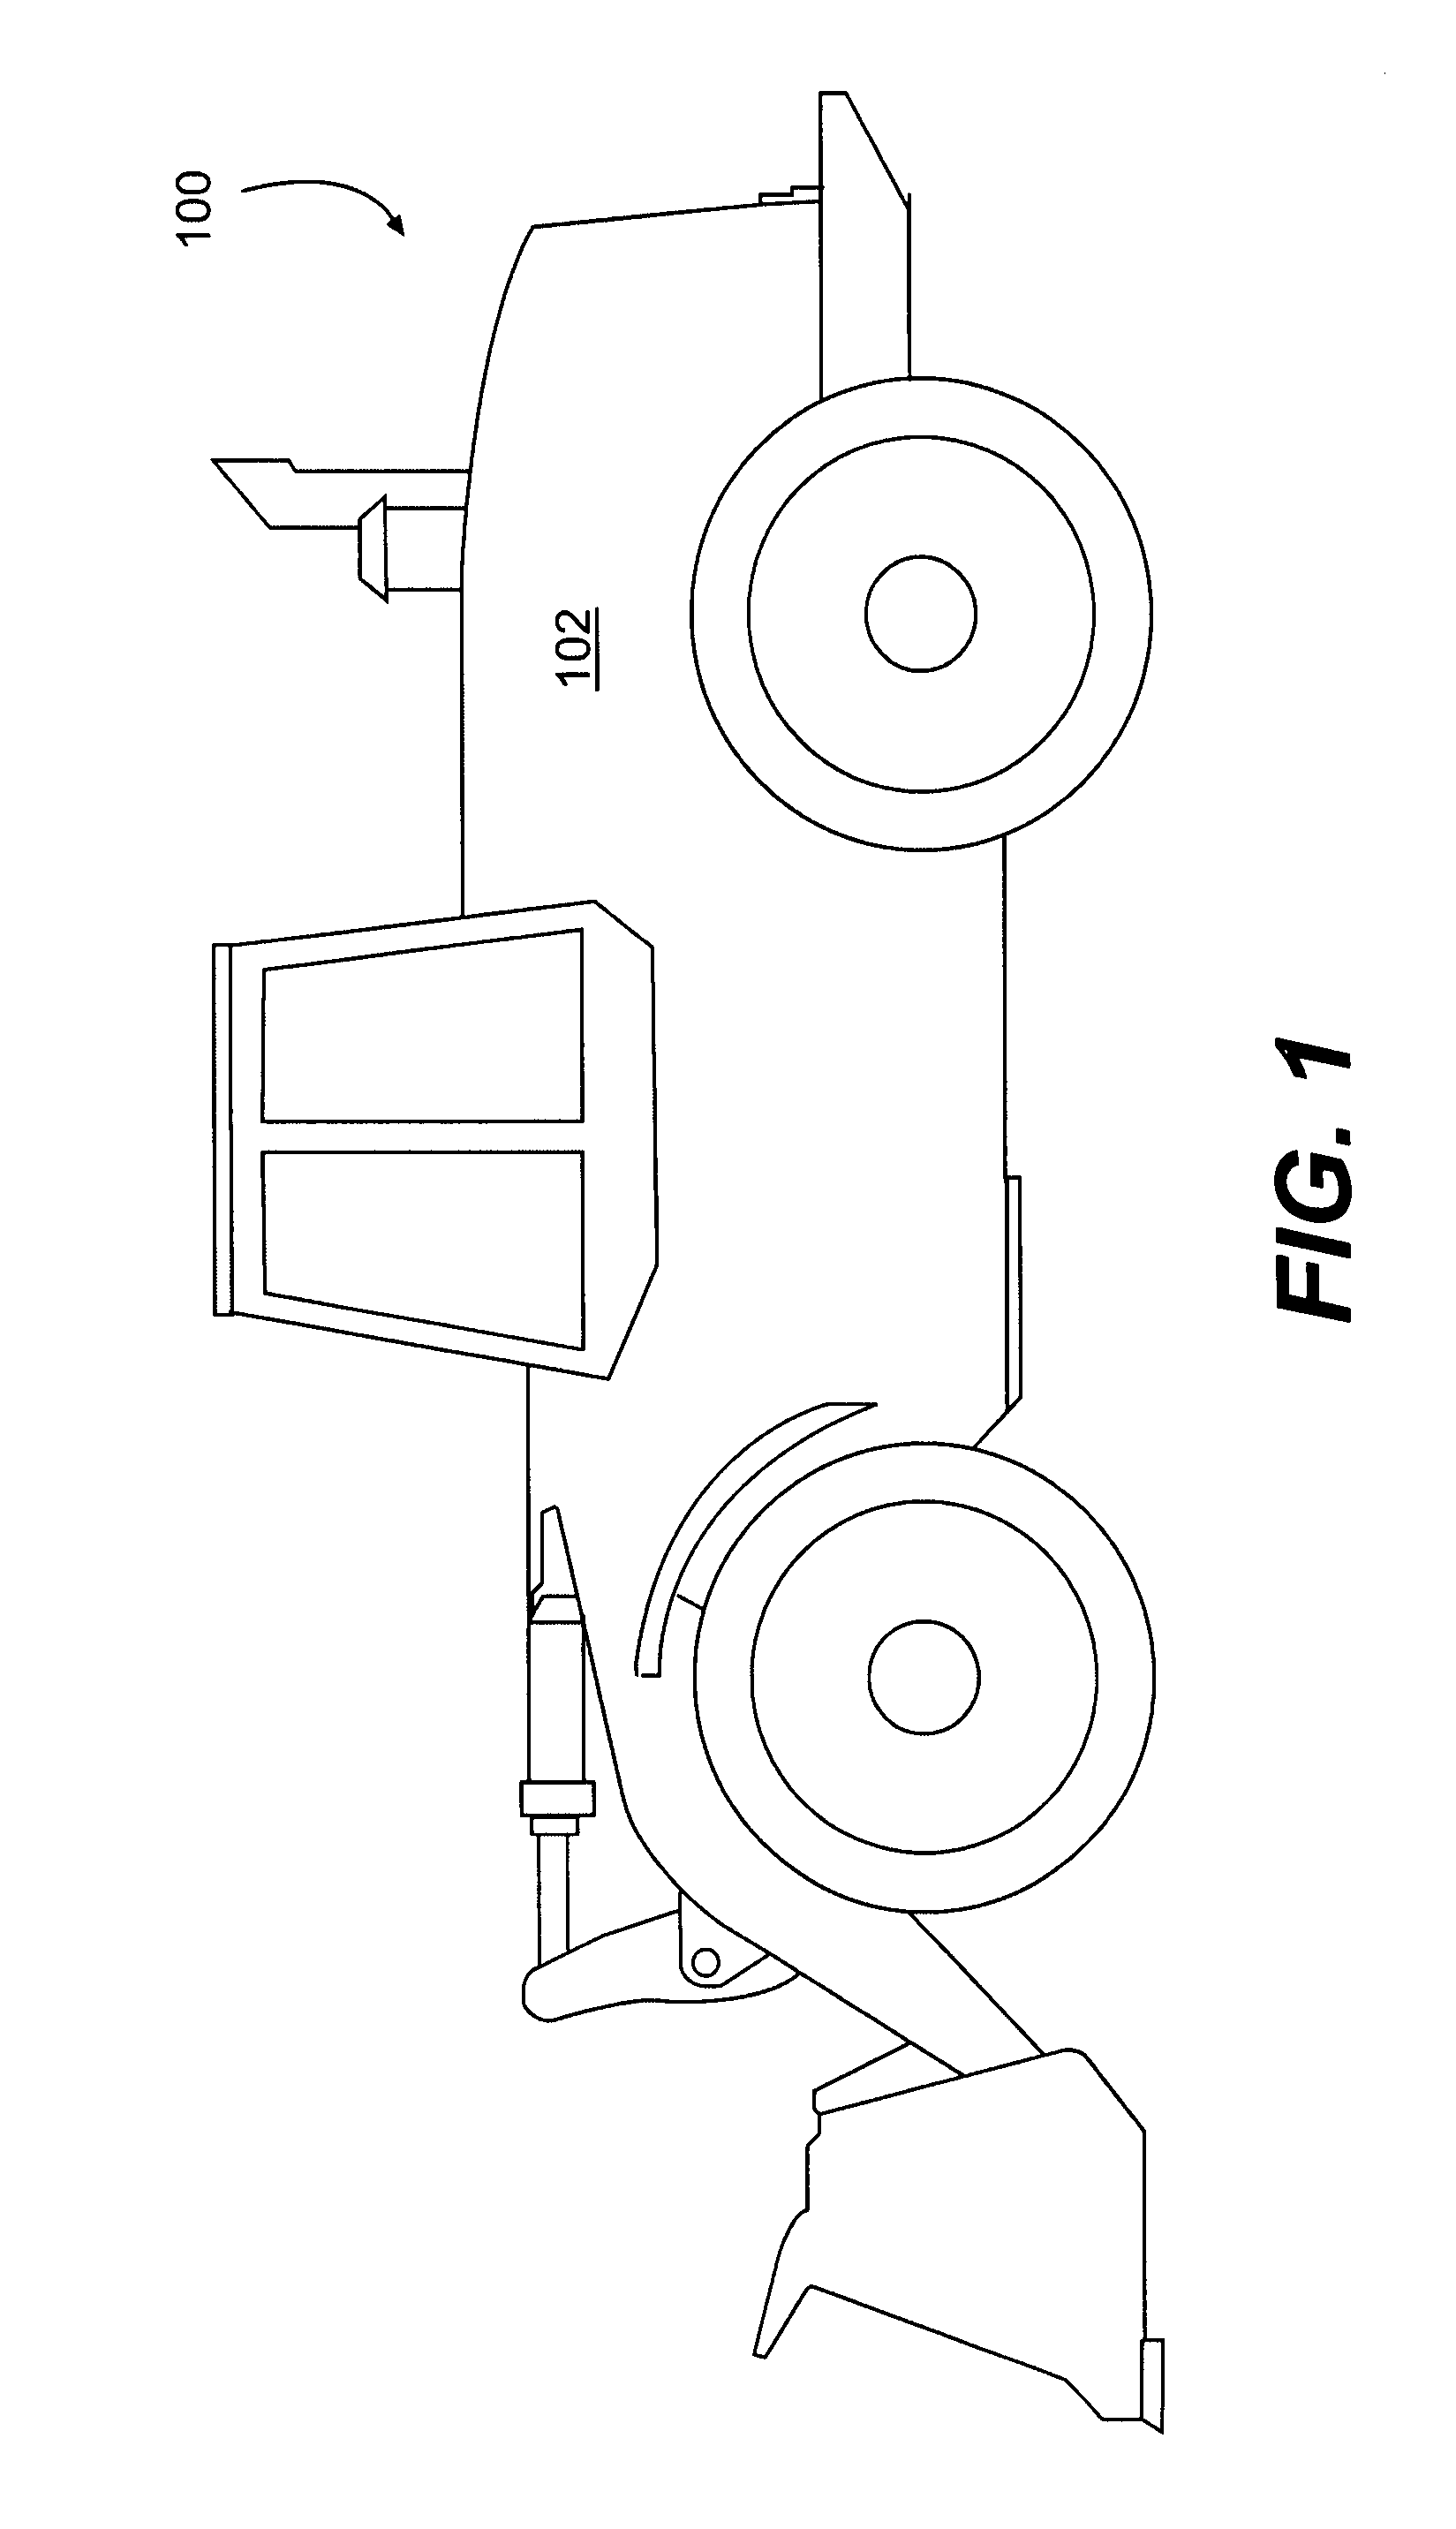 Prediction based engine control system and method